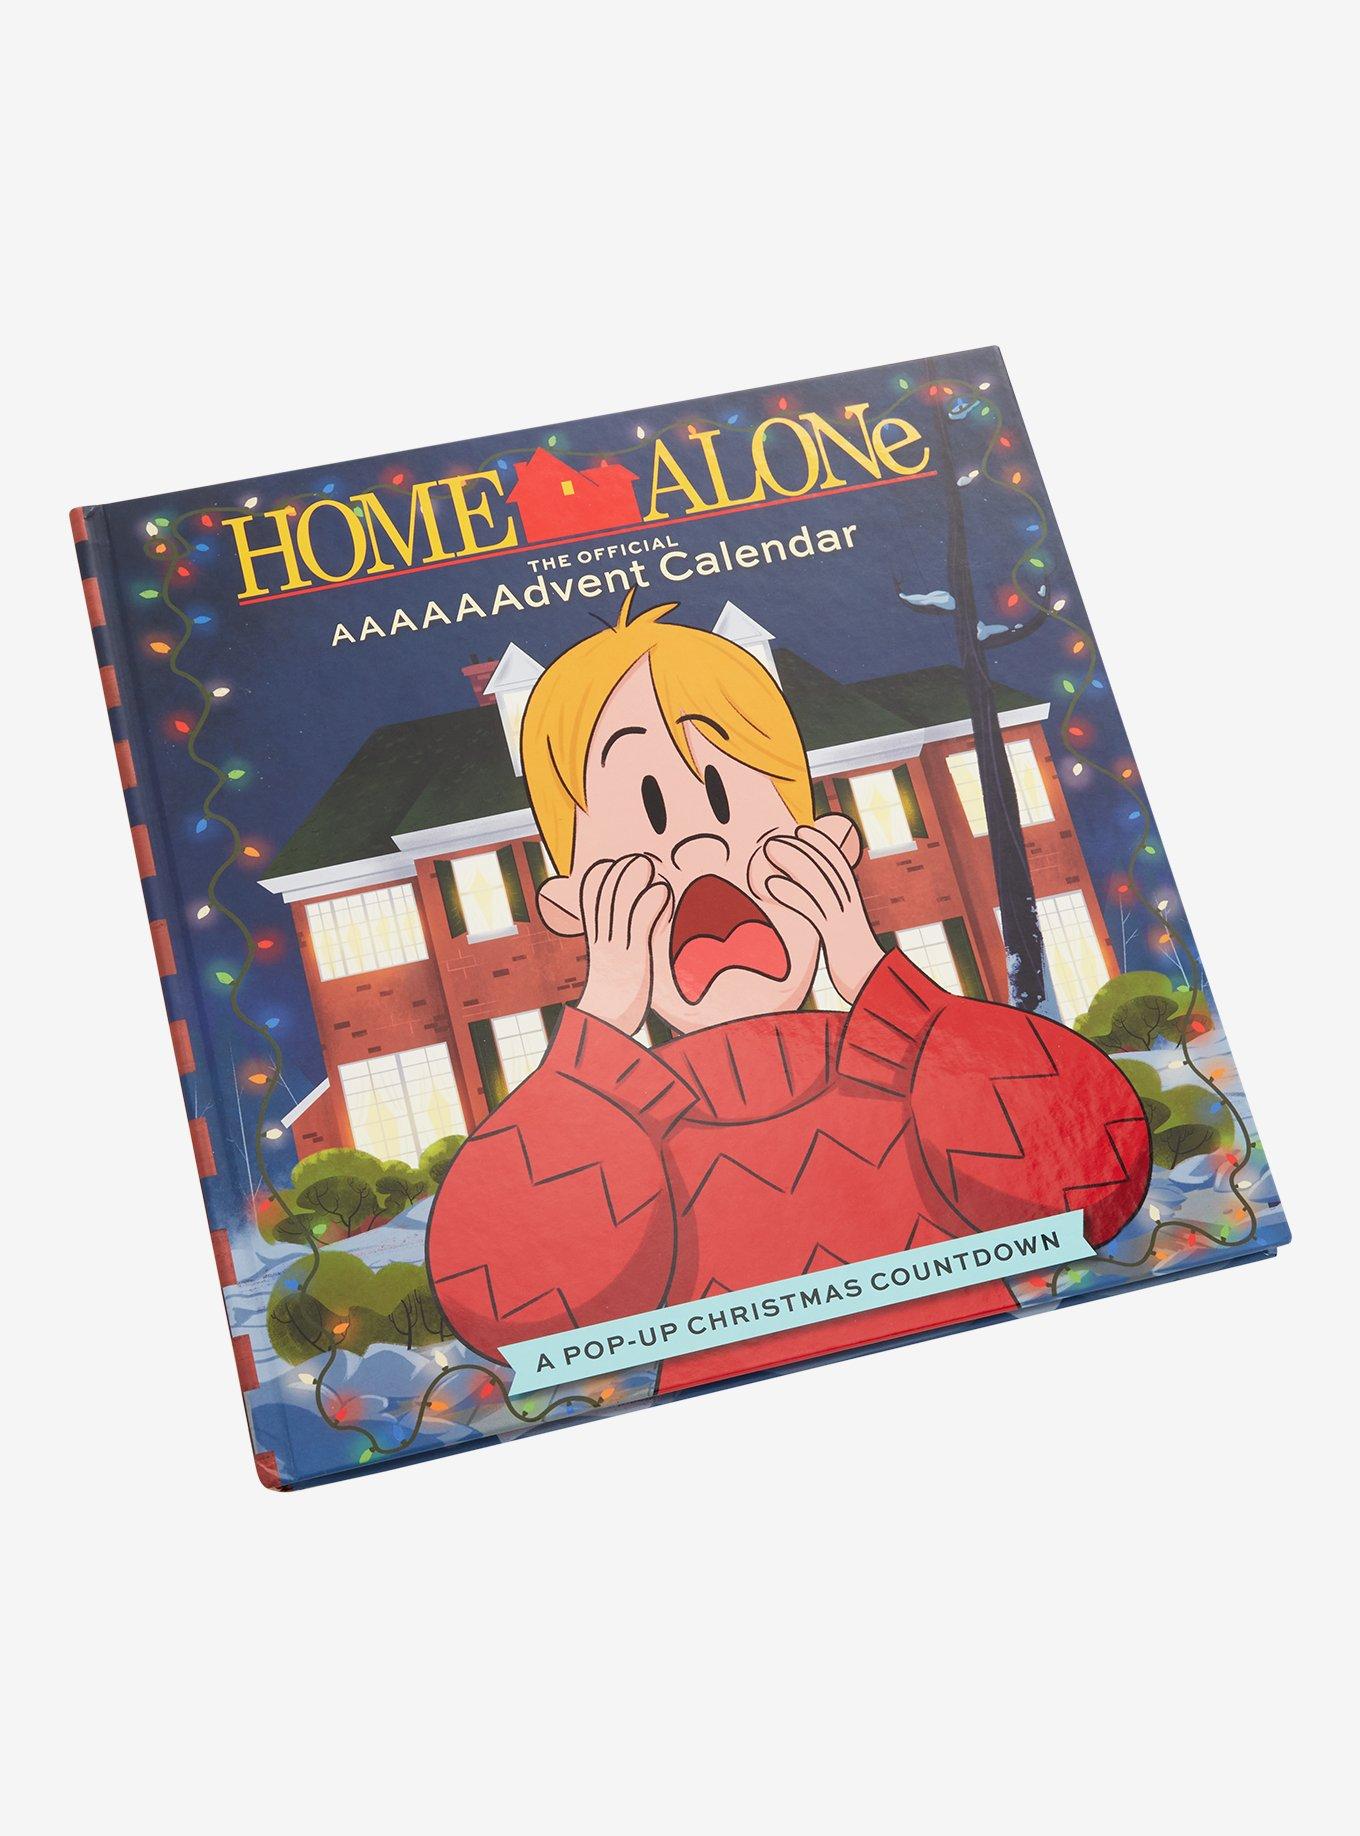 Home Alone: The Official Advent Calendar Hot Topic